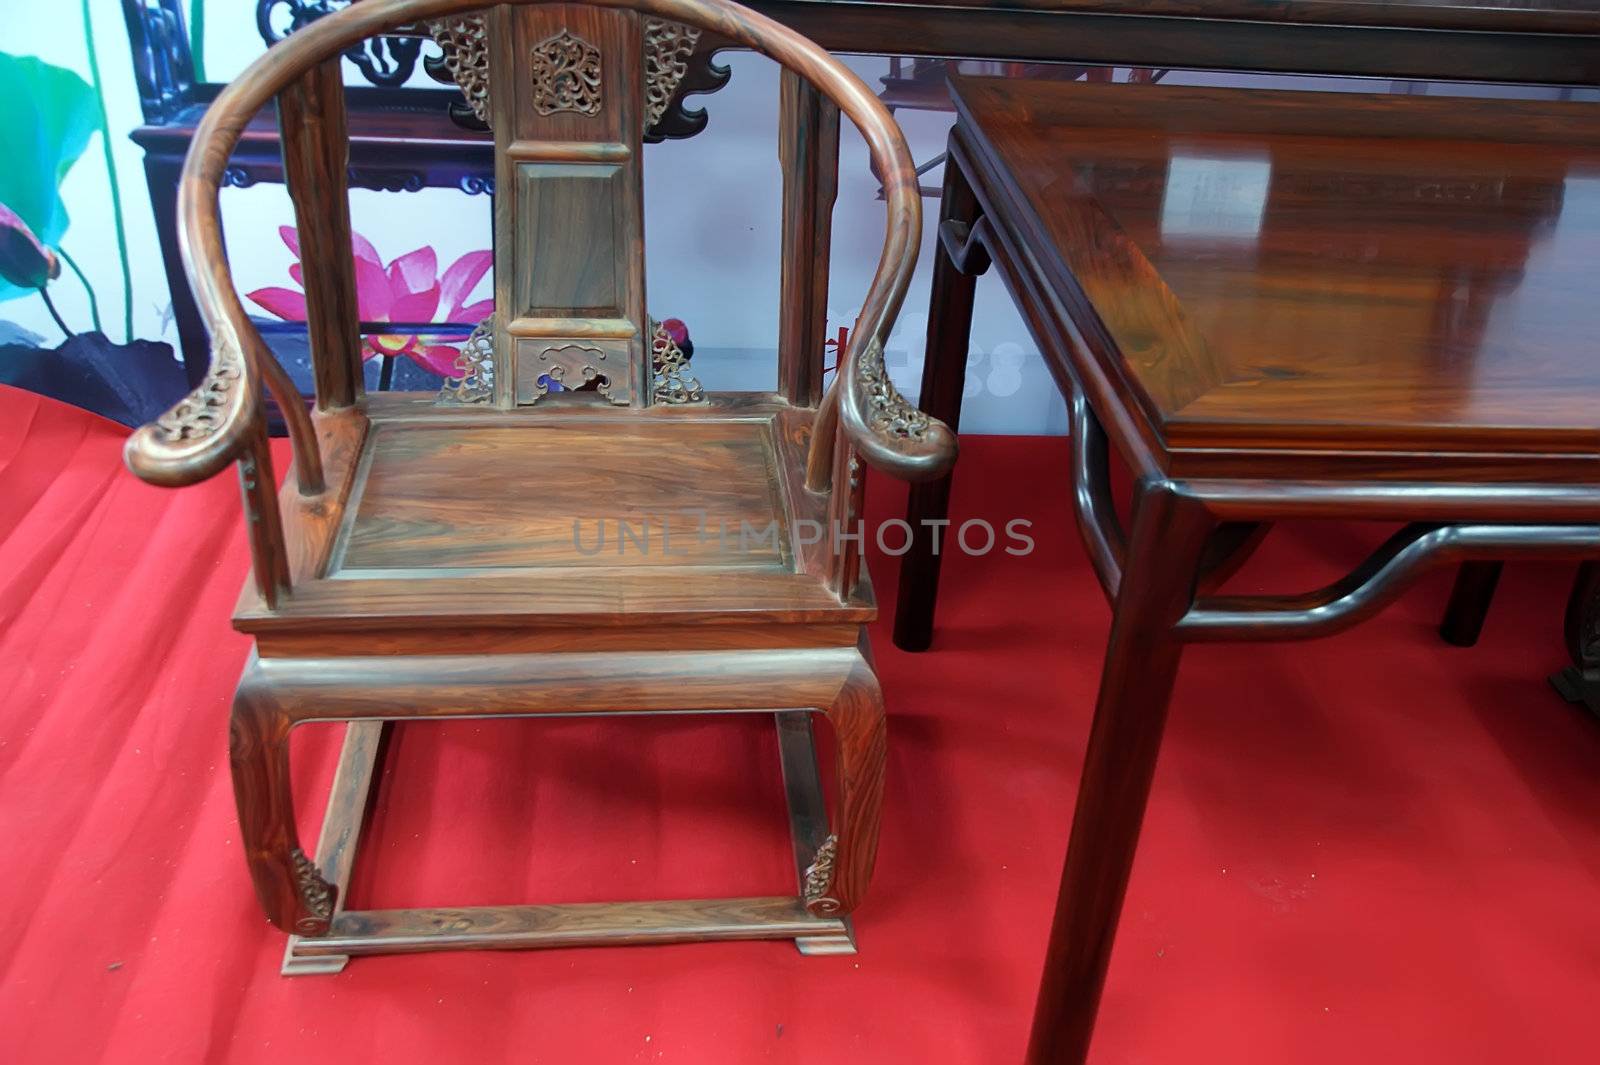 The typical pattern of Chinese ancient furniture